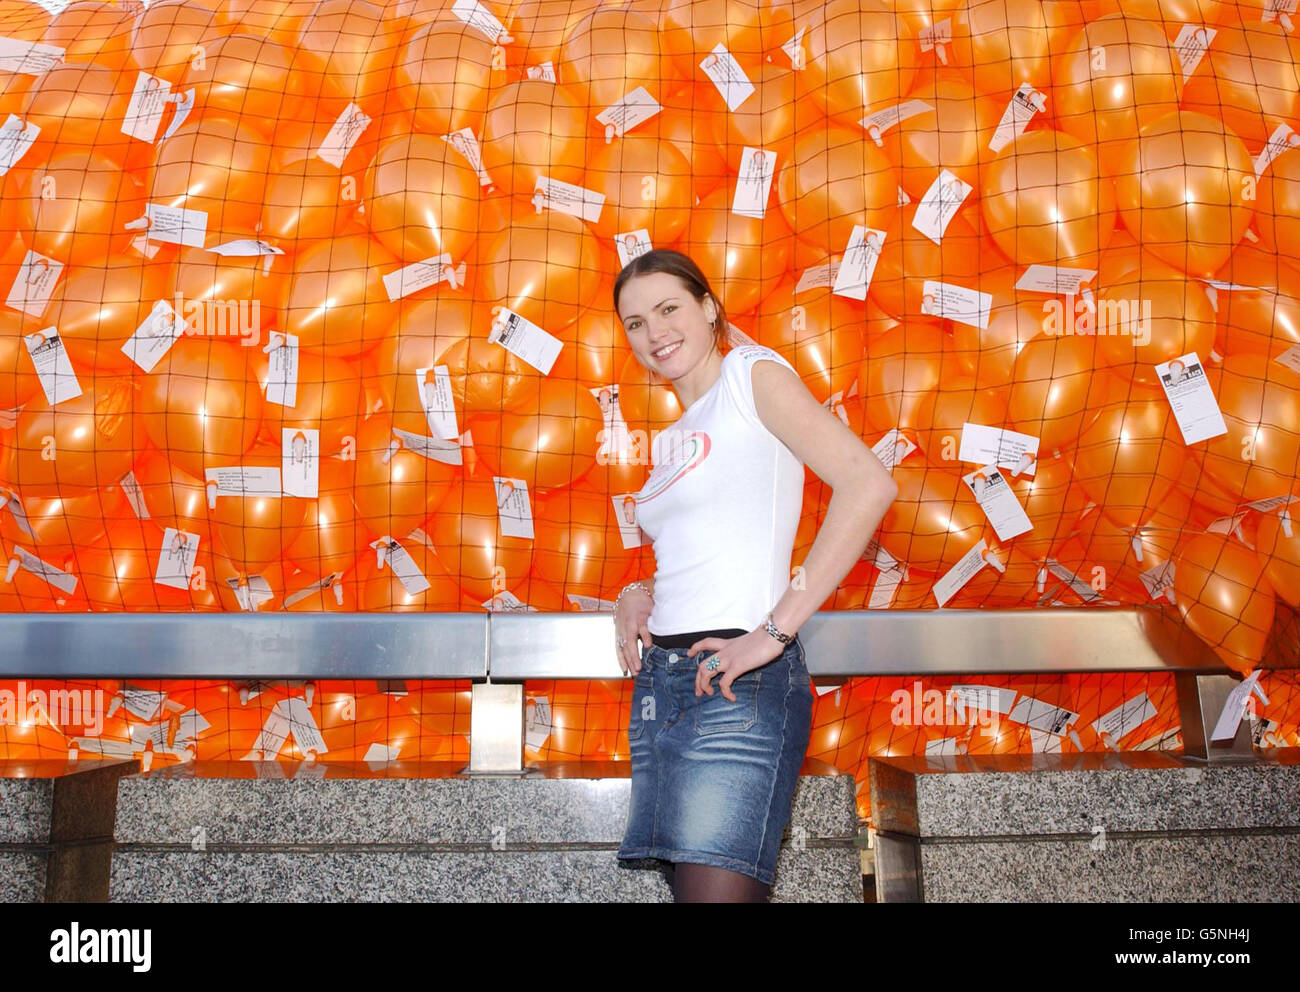 Model Kate Groombridge, launches 4,000 balloons for World Vision's fundraiser Orangeapeel at London Bridge in London. The 'Orangeapeel' is a national appeal which aims to raise funds for children affected by war. Stock Photo